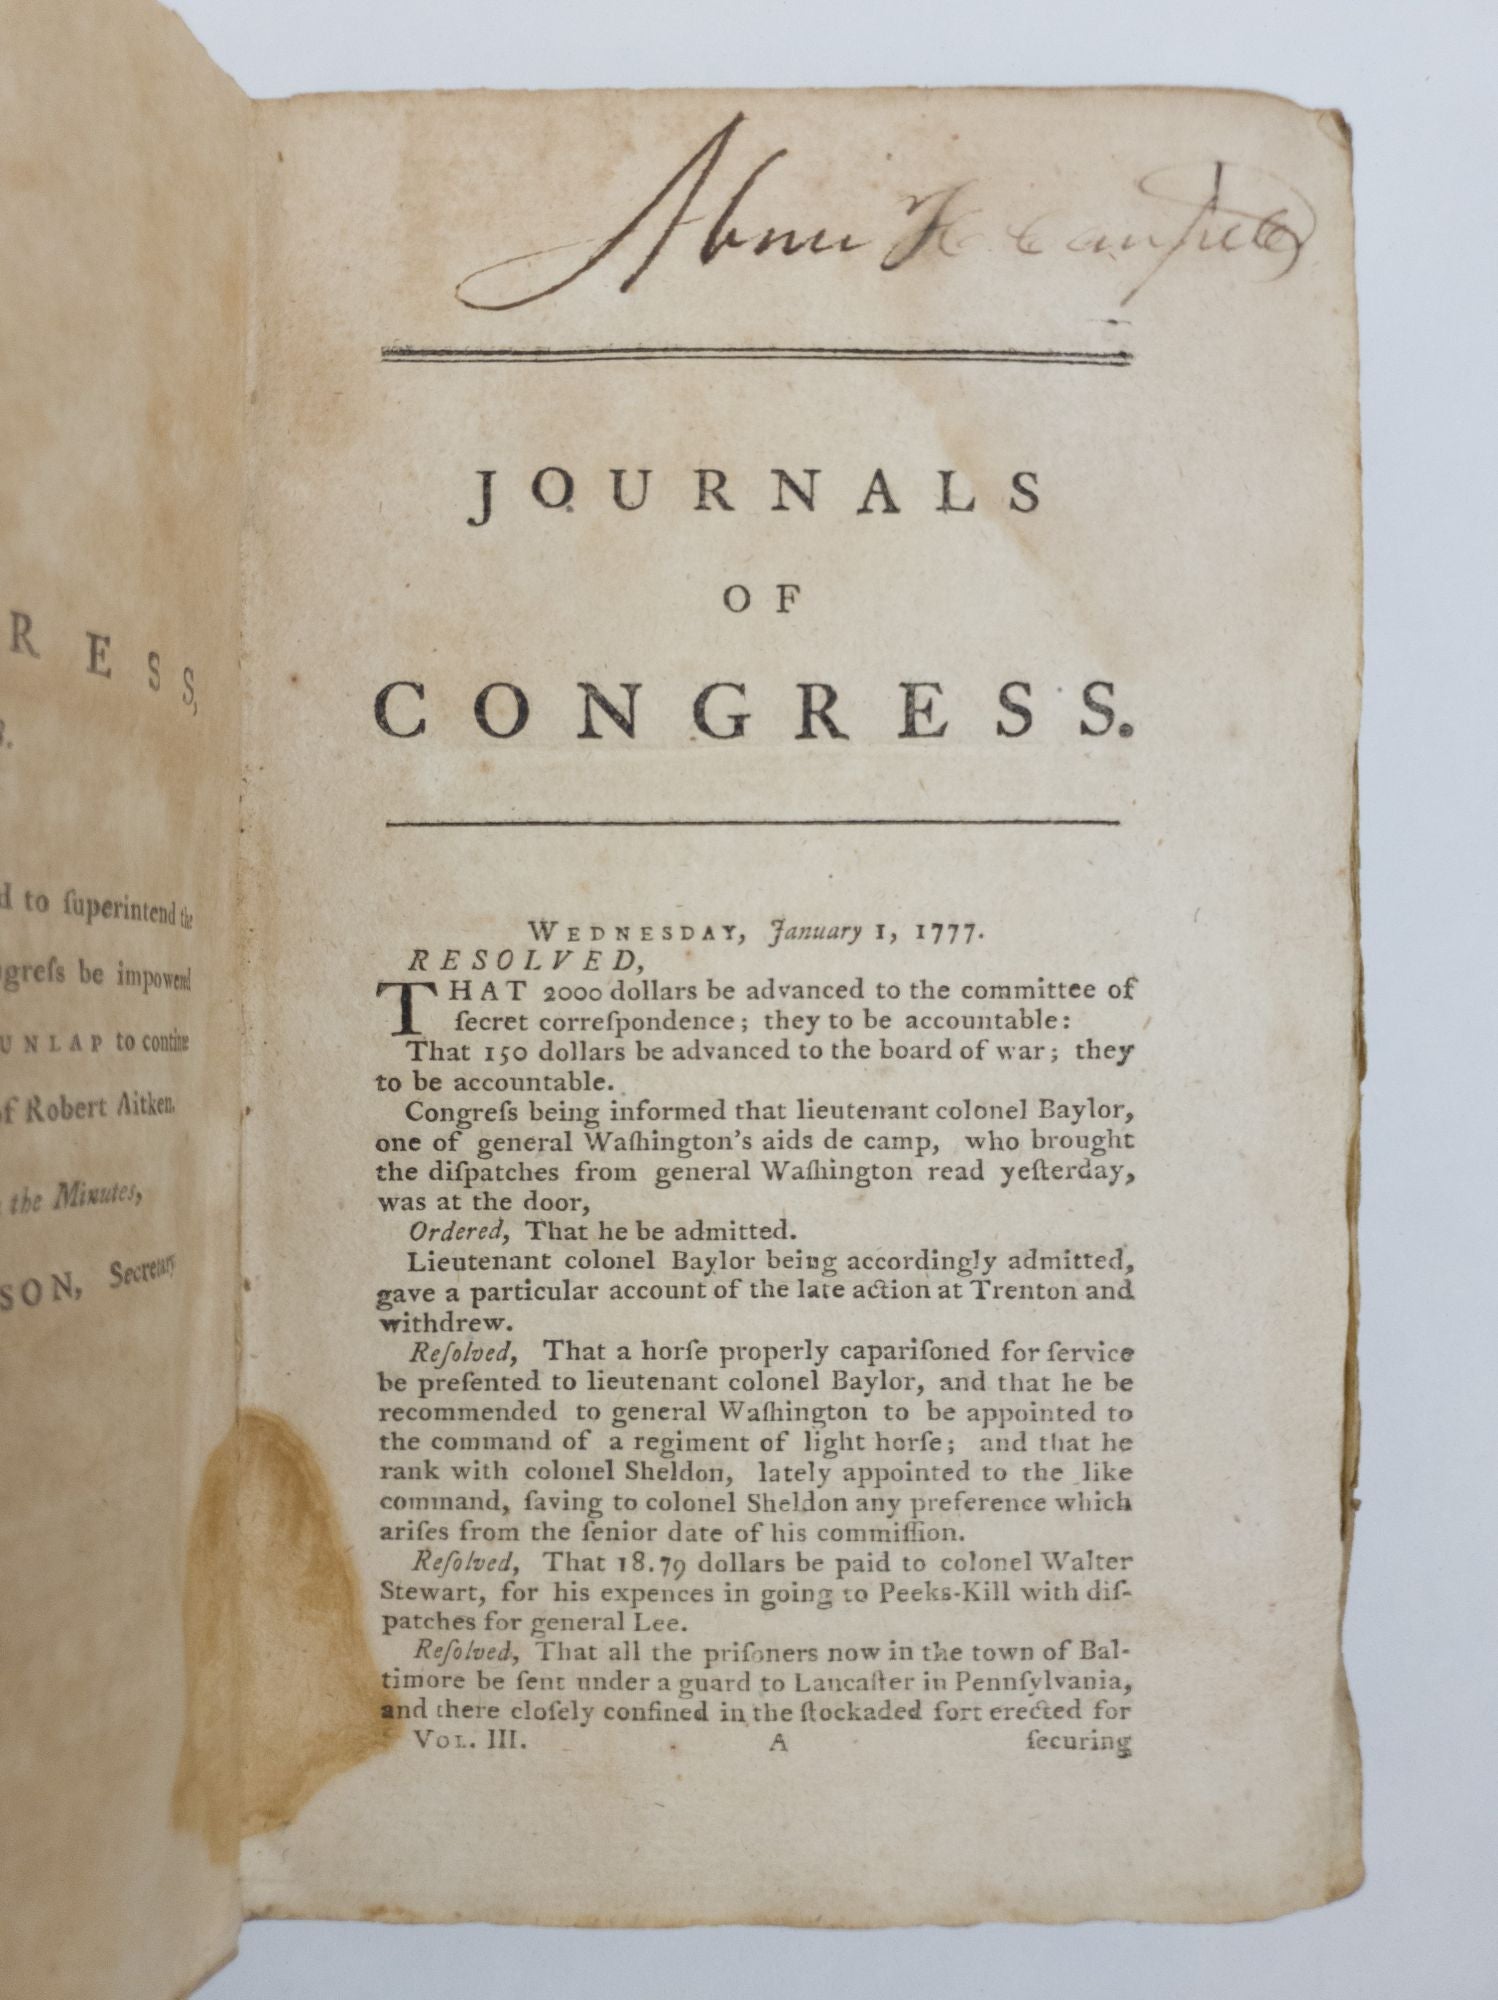 Product Image for JOURNALS OF CONGRESS [Volumes II - V, VII - IX]